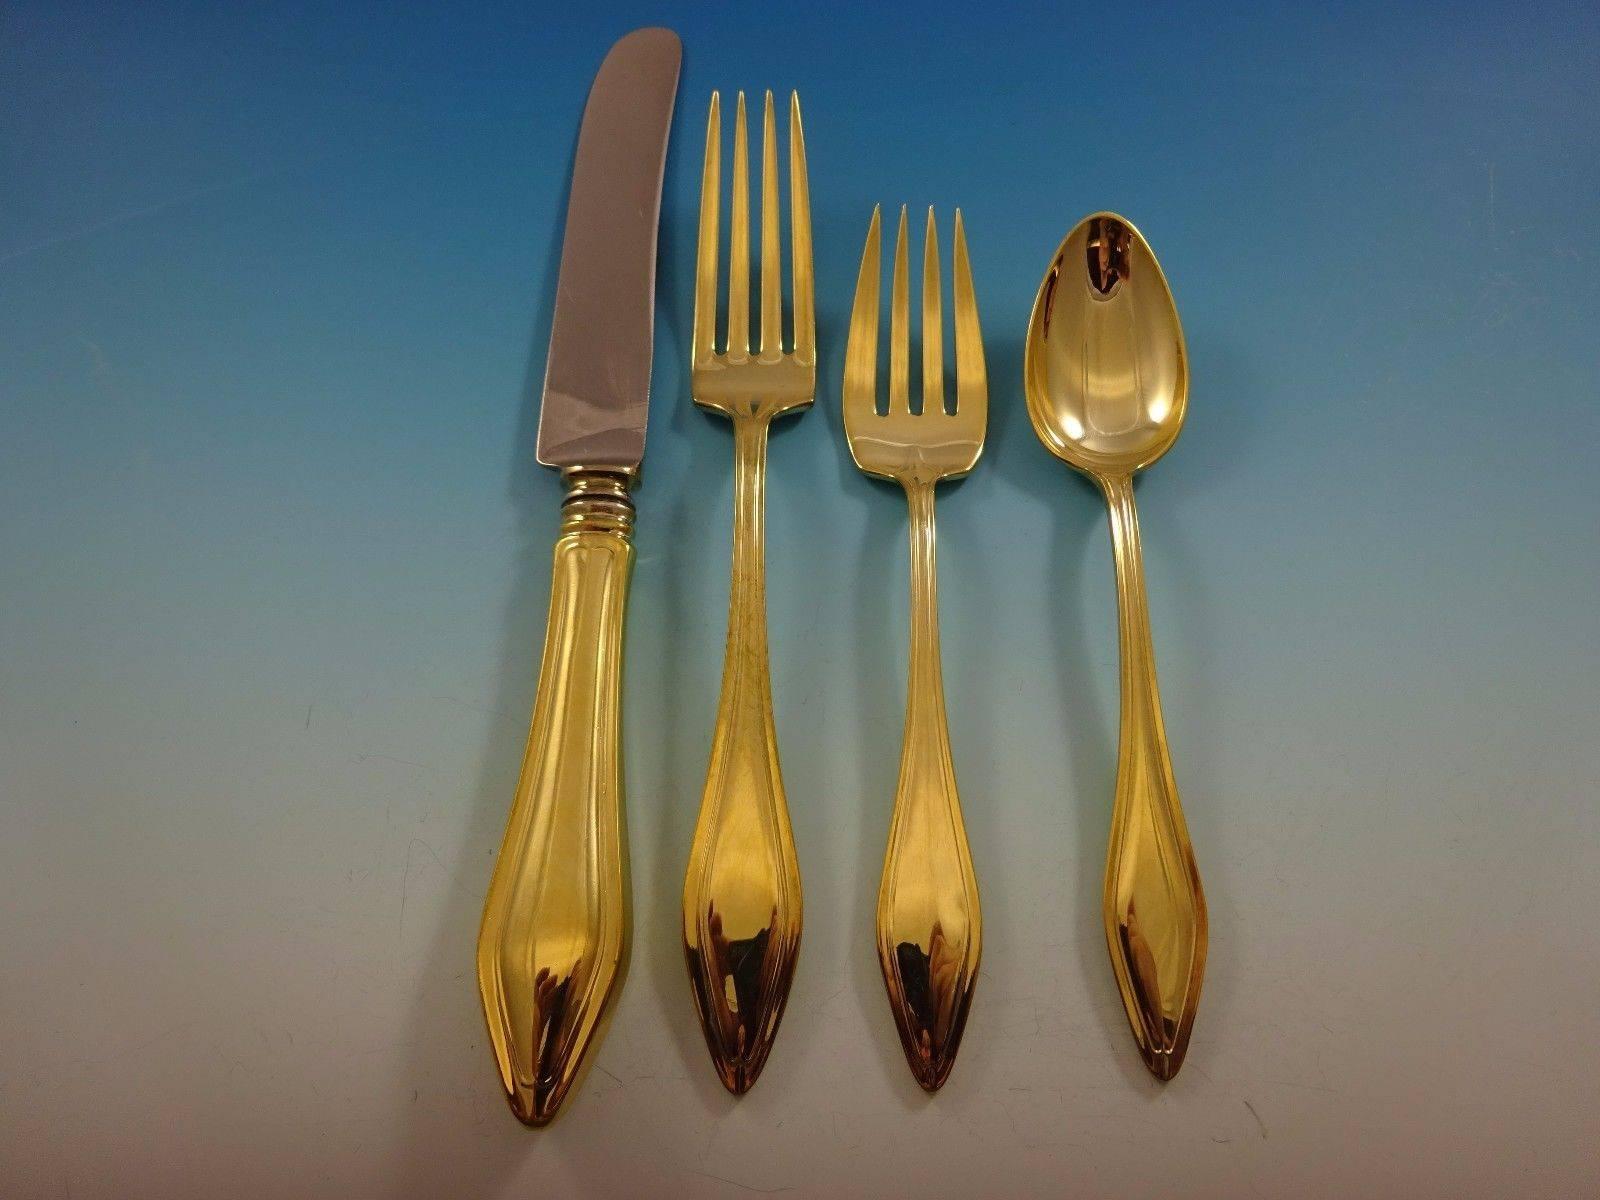 Mary Chilton Gold by Towle Sterling Silver flatware set - 24 pieces. This set is vermeil (completely gold-washed) and includes: 

6 Knives, 9